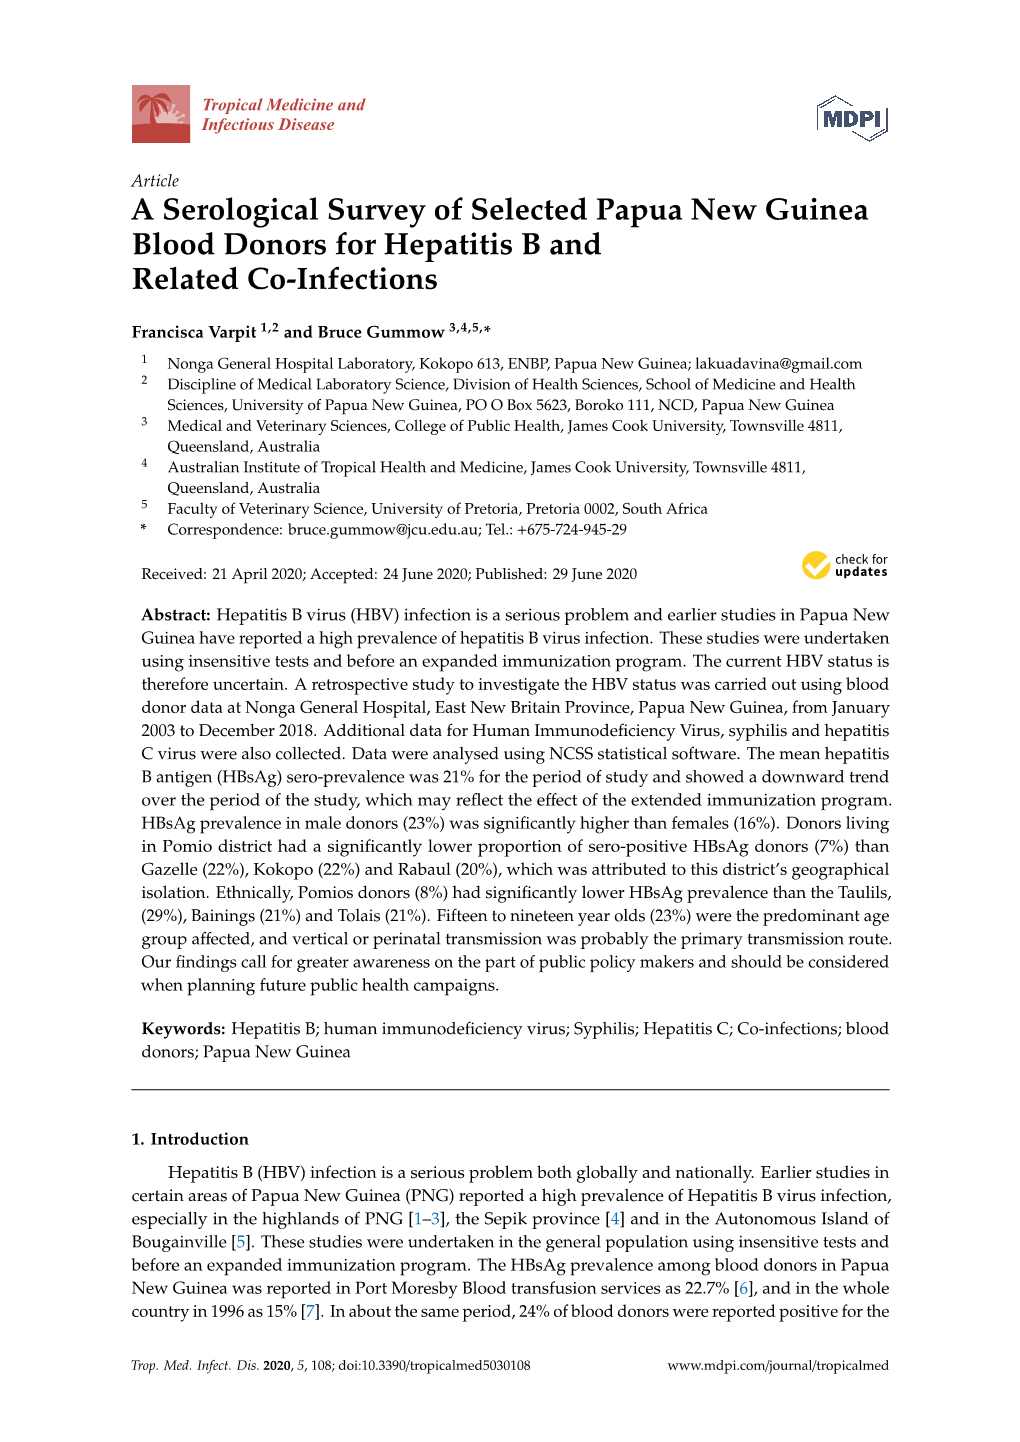 A Serological Survey of Selected Papua New Guinea Blood Donors for Hepatitis B and Related Co-Infections